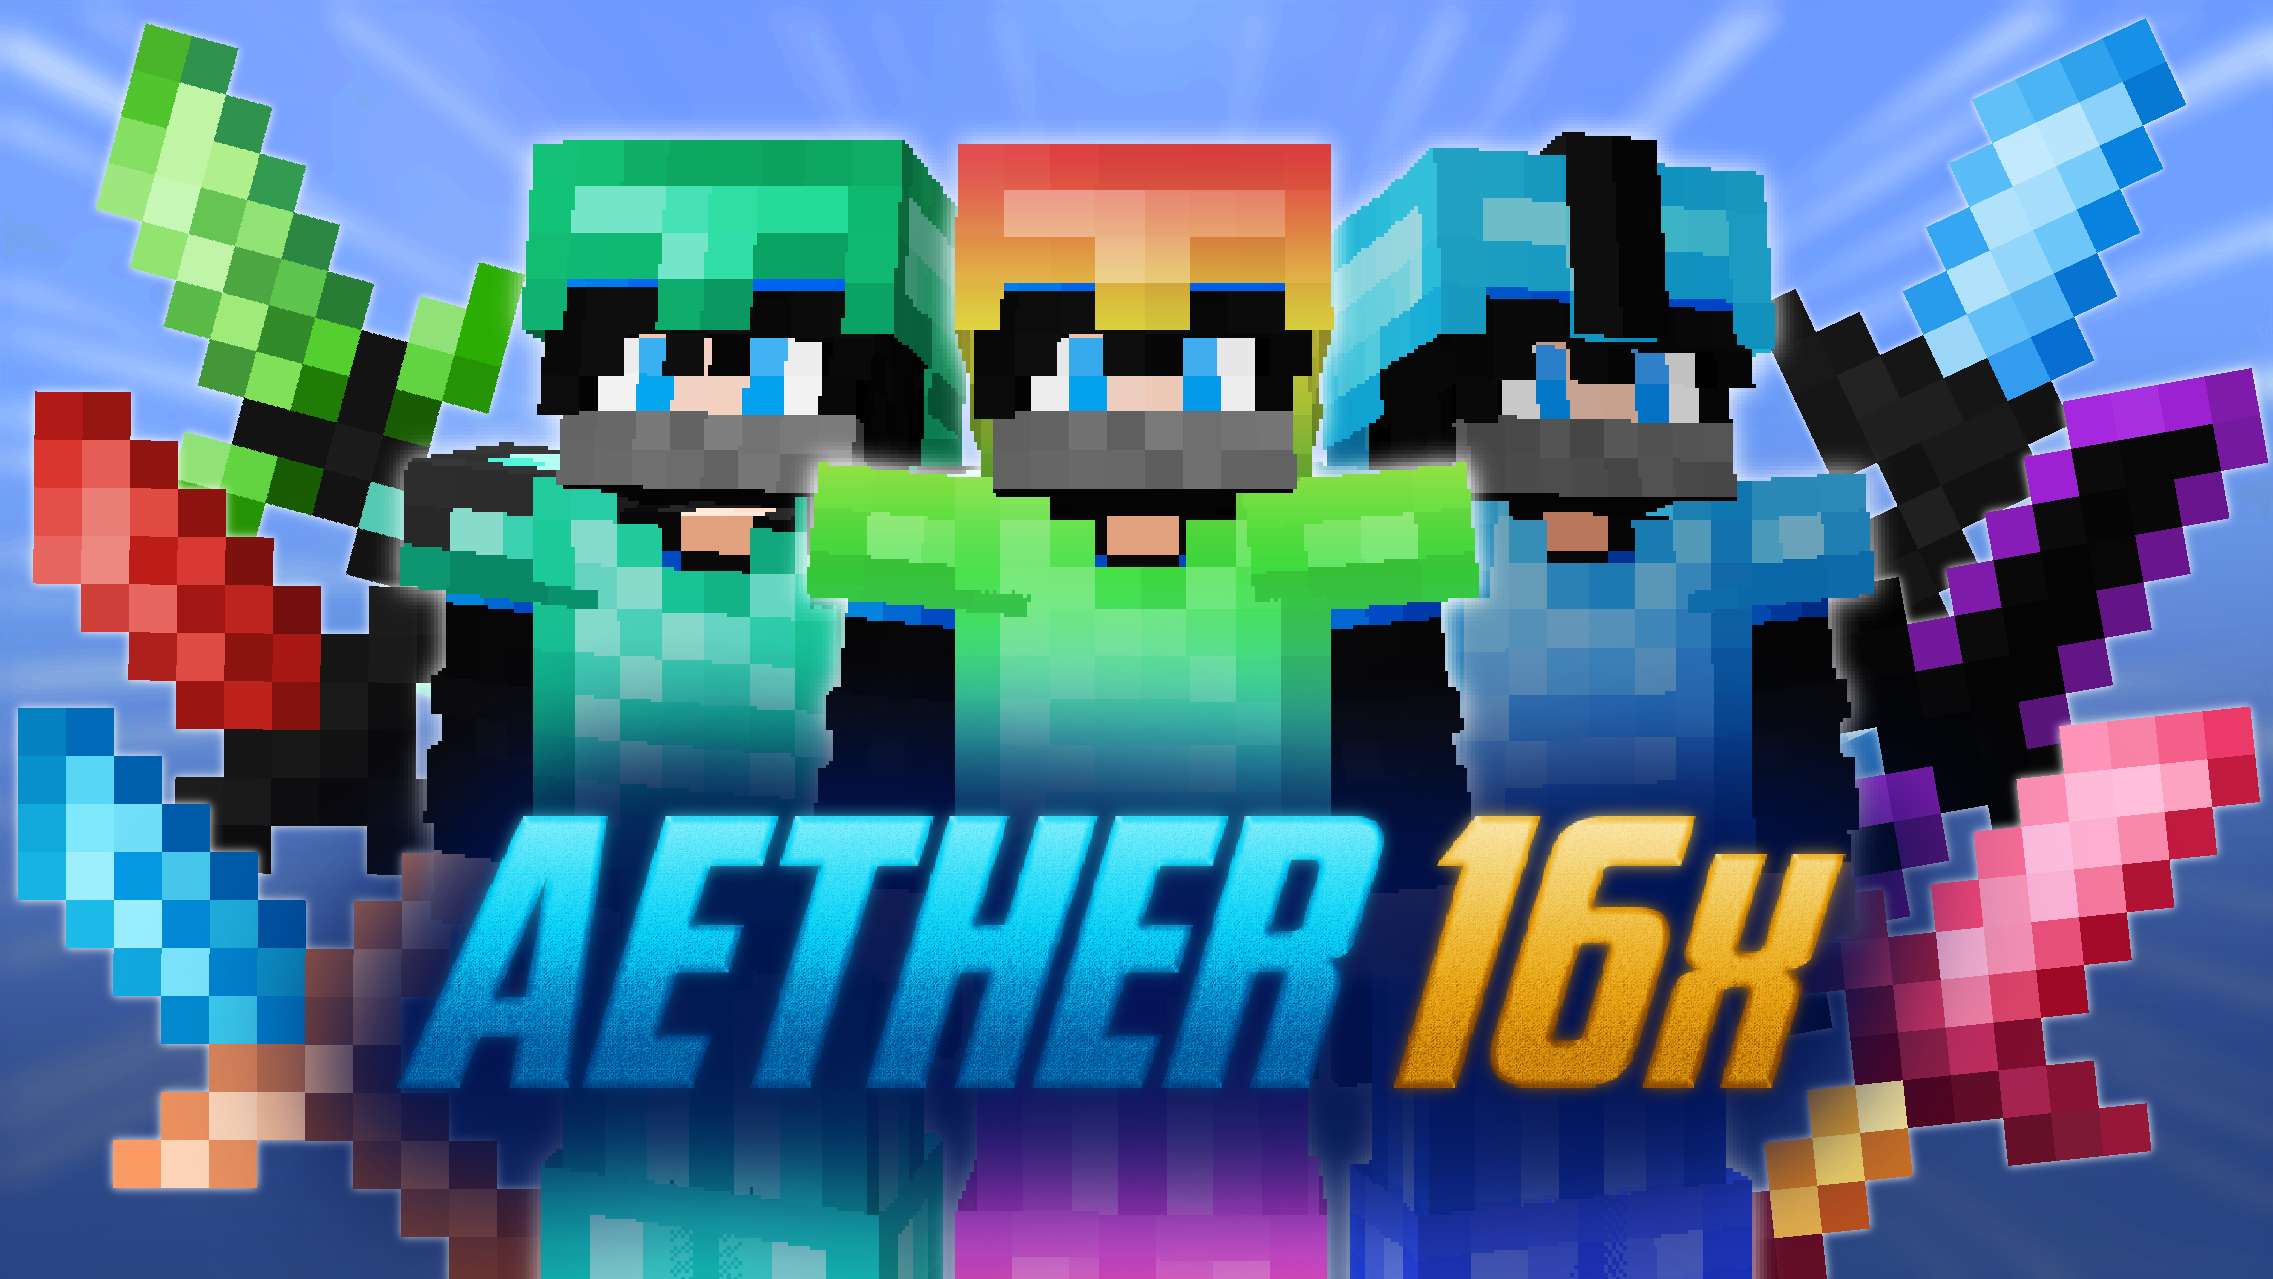 Aether 16x [TheLaSteve] 16 by Mqryo on PvPRP